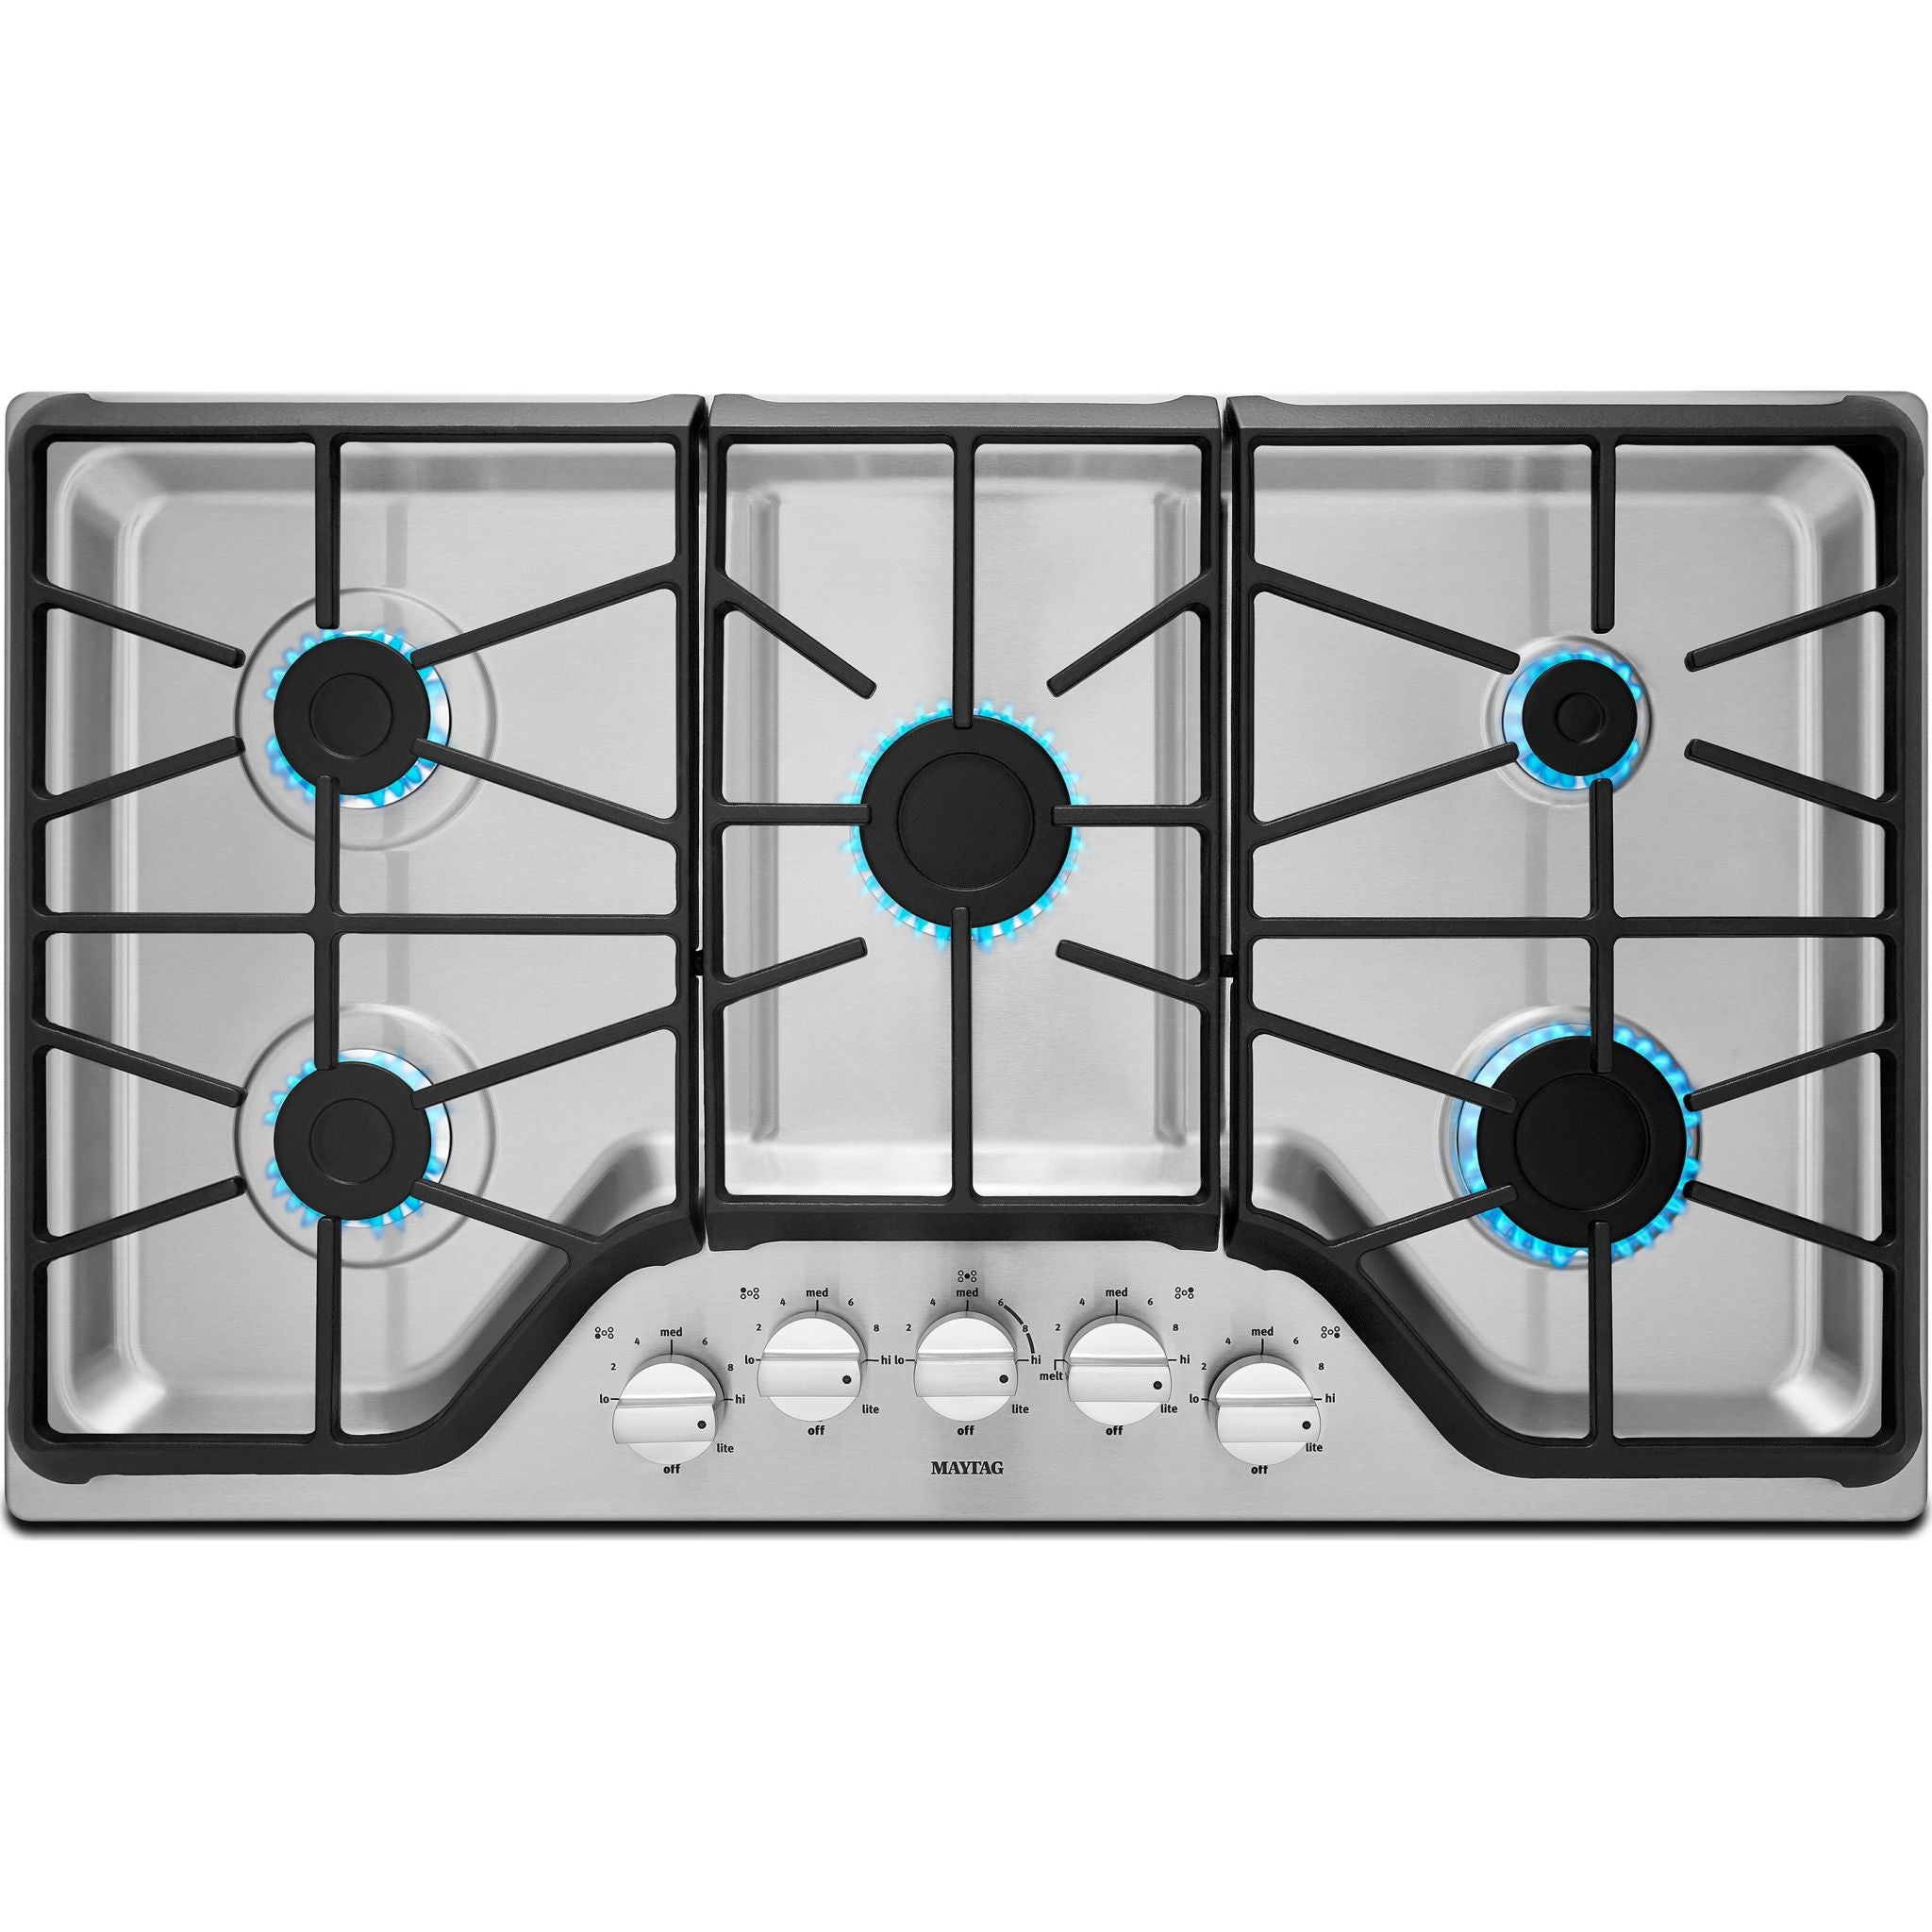 Maytag, Maytag 36" Gas Cooktop (MGC7536DS) - Stainless Steel